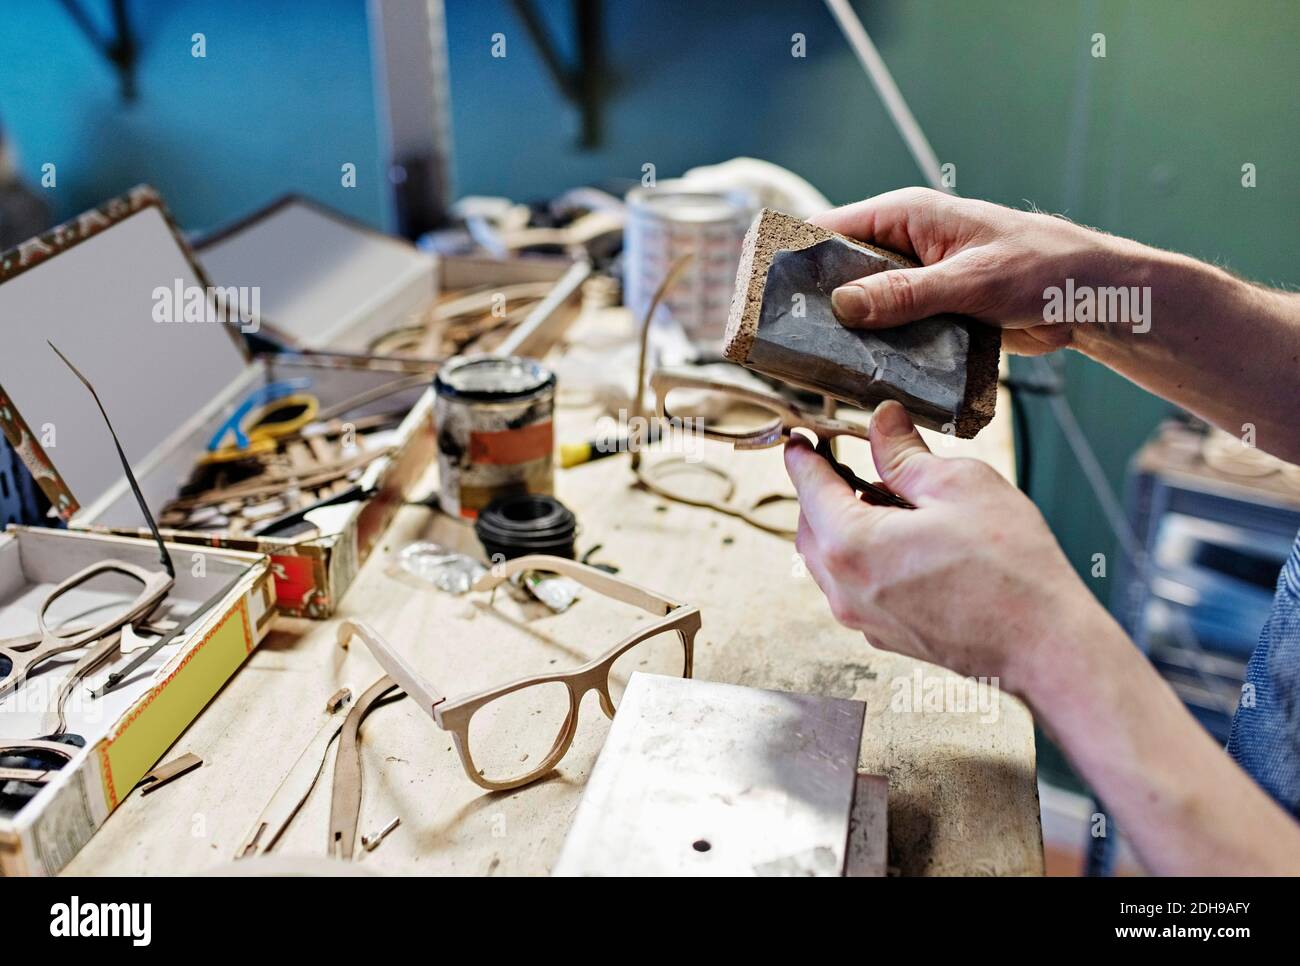 Cropped image of male owner rubbing eyeglasses with work tool at workshop Stock Photo